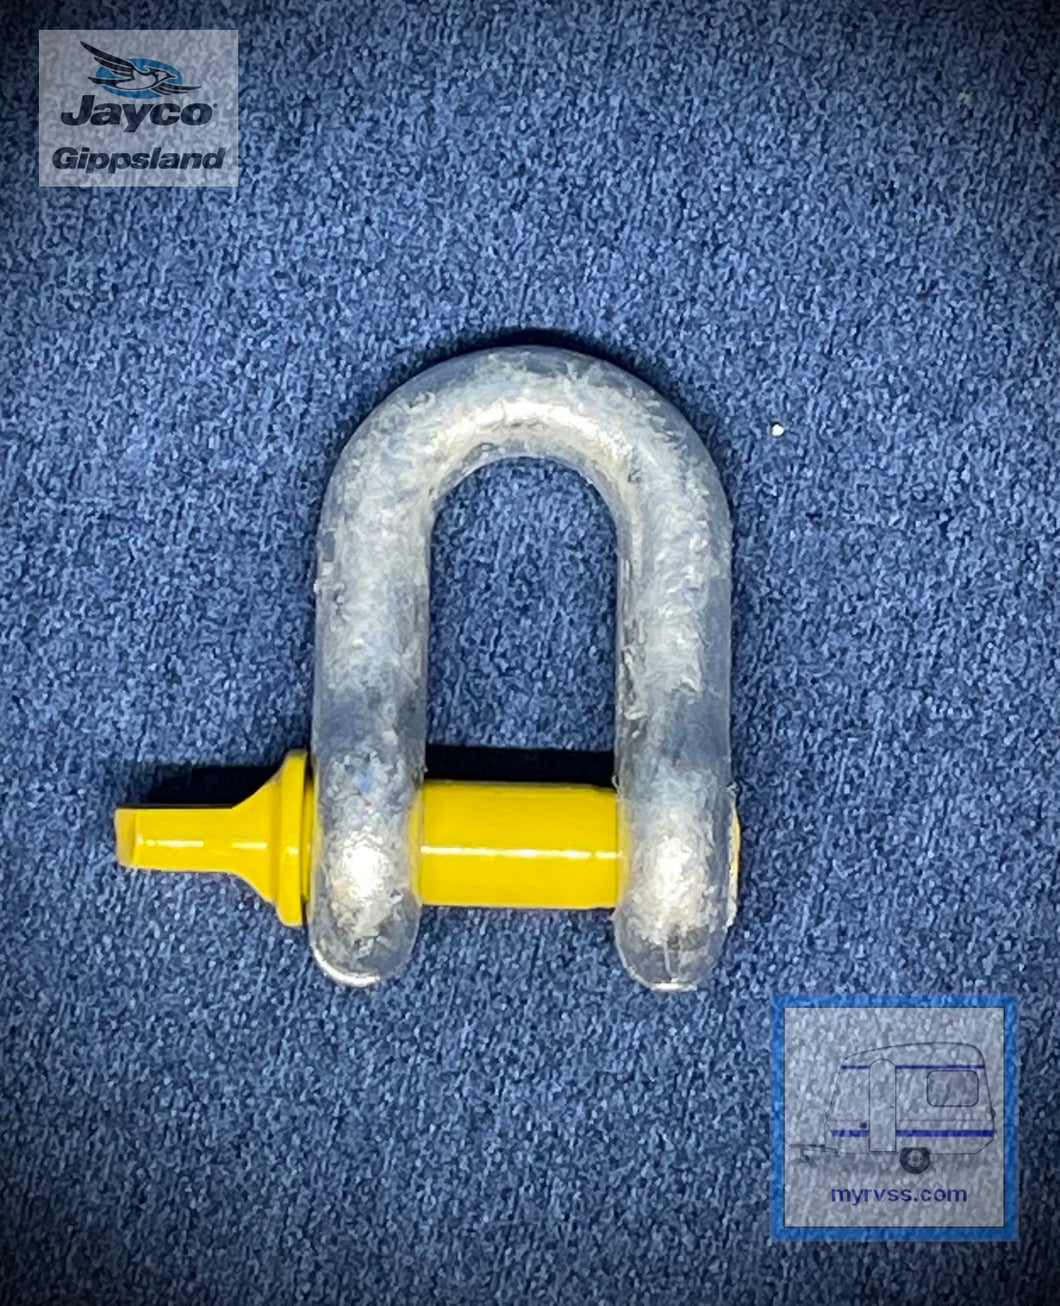 HAYMAN REESE Rated Shackle 10mm